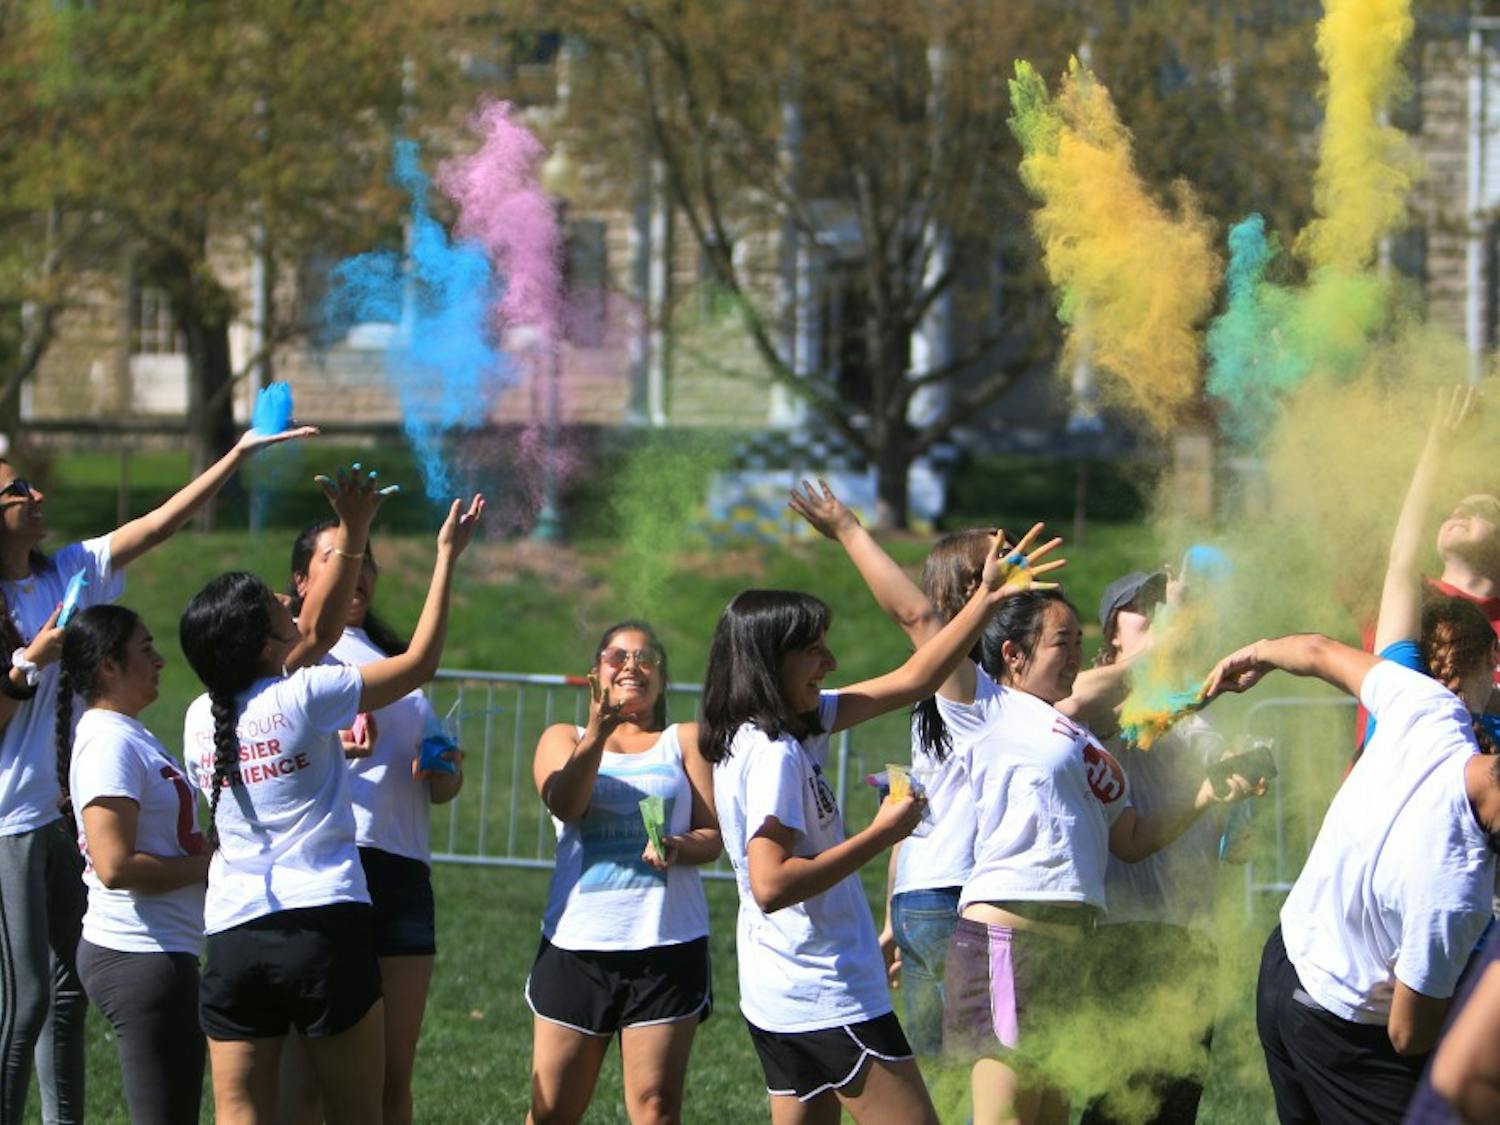 GALLERY: Students and community members celebrate Holi with a festival of color